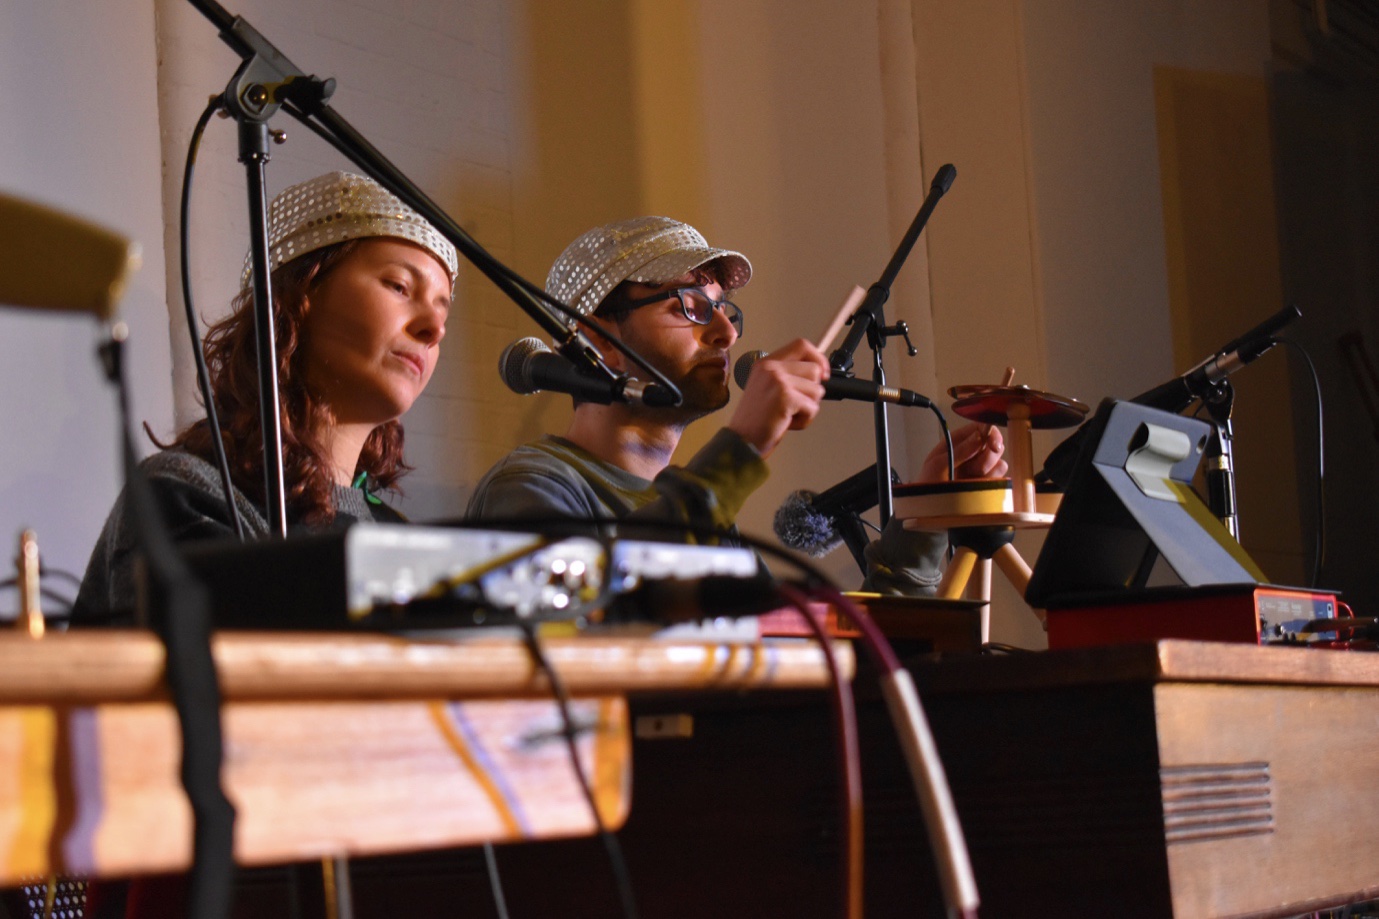 The Fargions perform on stage seated at keys, with microphones, audio interfaces and percussion instruments.